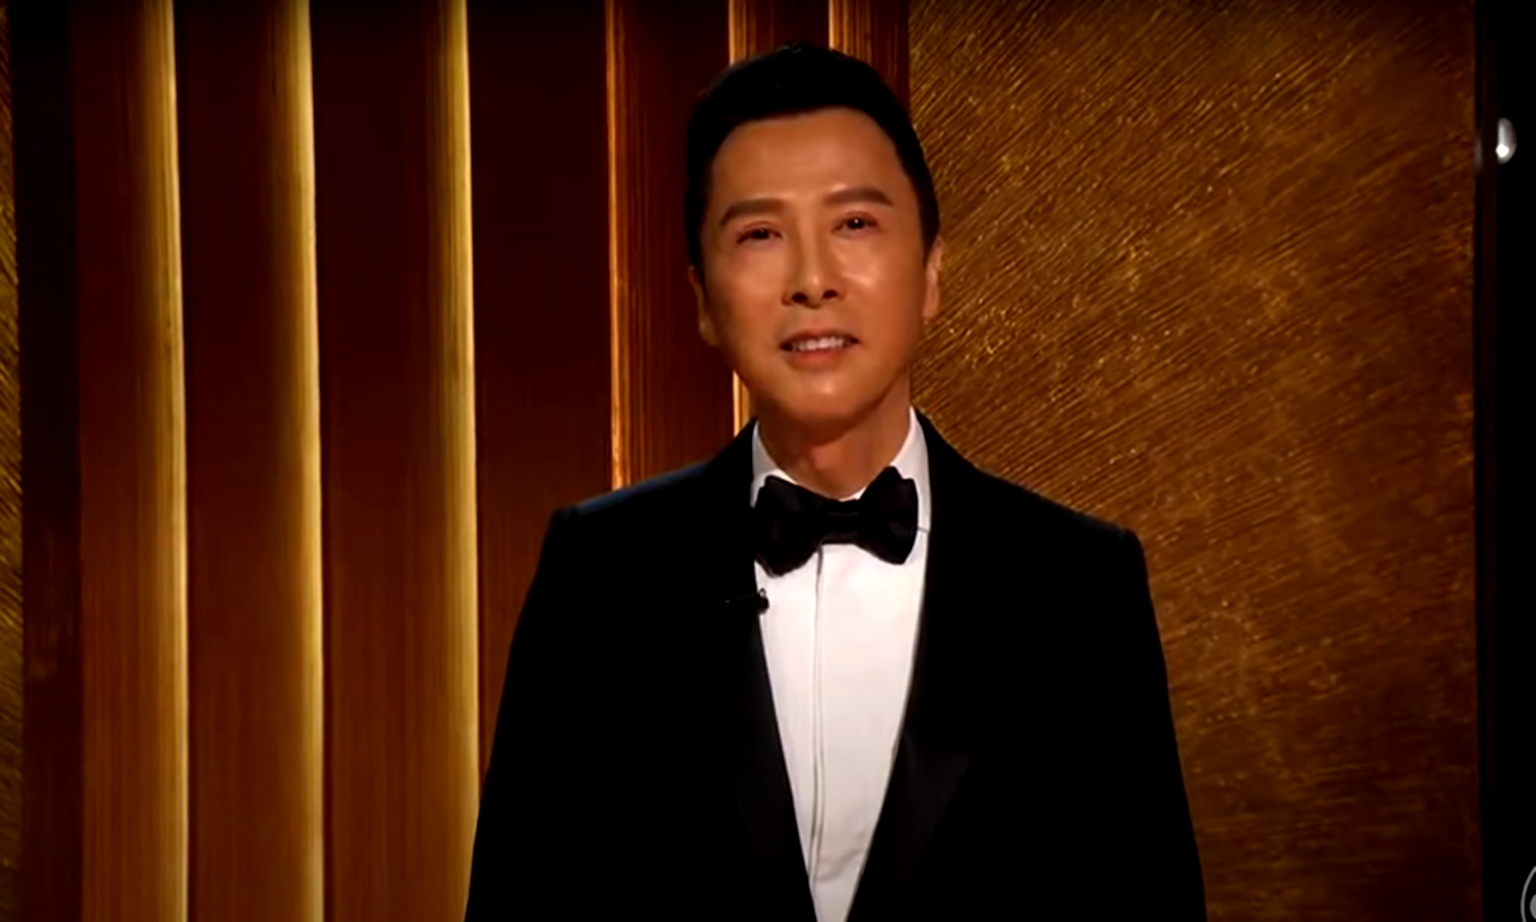 Donnie Yen responds to petition calling for his Oscars removal: ‘cancel culture has got to stop’